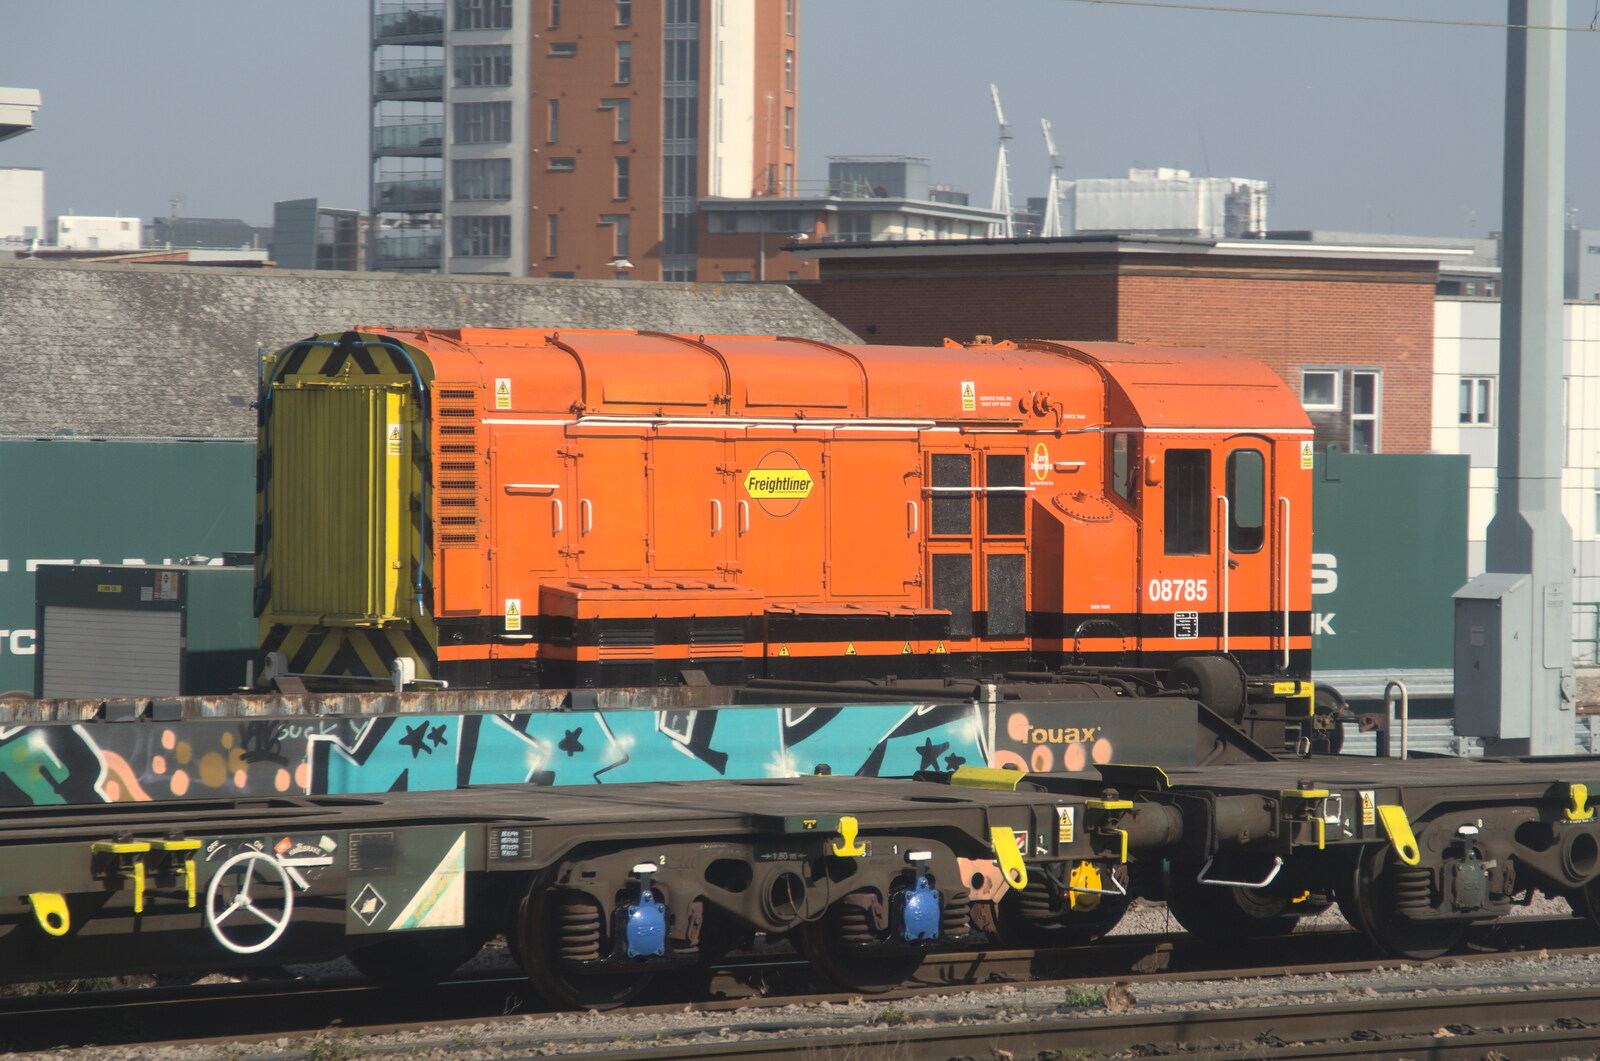 Freightliner Class 08 shunter 08785 at Ipswich from Genesis at the O2, North Greenwich, London - 24th March 2022